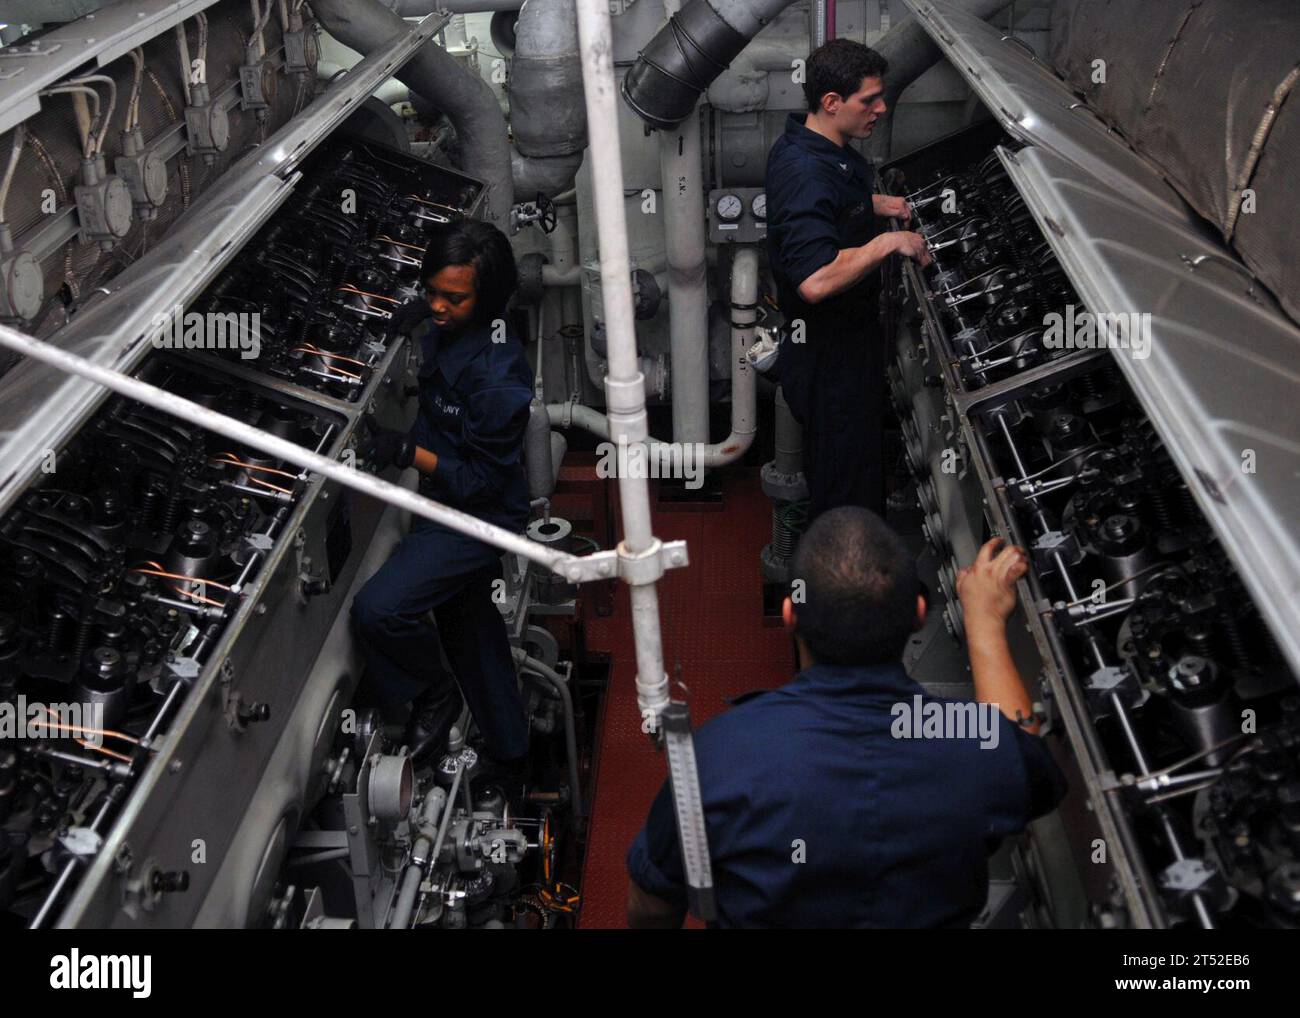 110302DM338-102 PACIFIC OCEAN (March 2, 2011) Sailors assigned to the aircraft carrier USS Ronald Reagan (CVN 76) open the cylinder head covers on the aft emergency diesel generators in preparation for daily maintenance. The Ronald Reagan Carrier Strike Group is underway continuing training before deploying to the western Pacific Ocean and U.S. Central Command area of responsibility. Navy Stock Photo